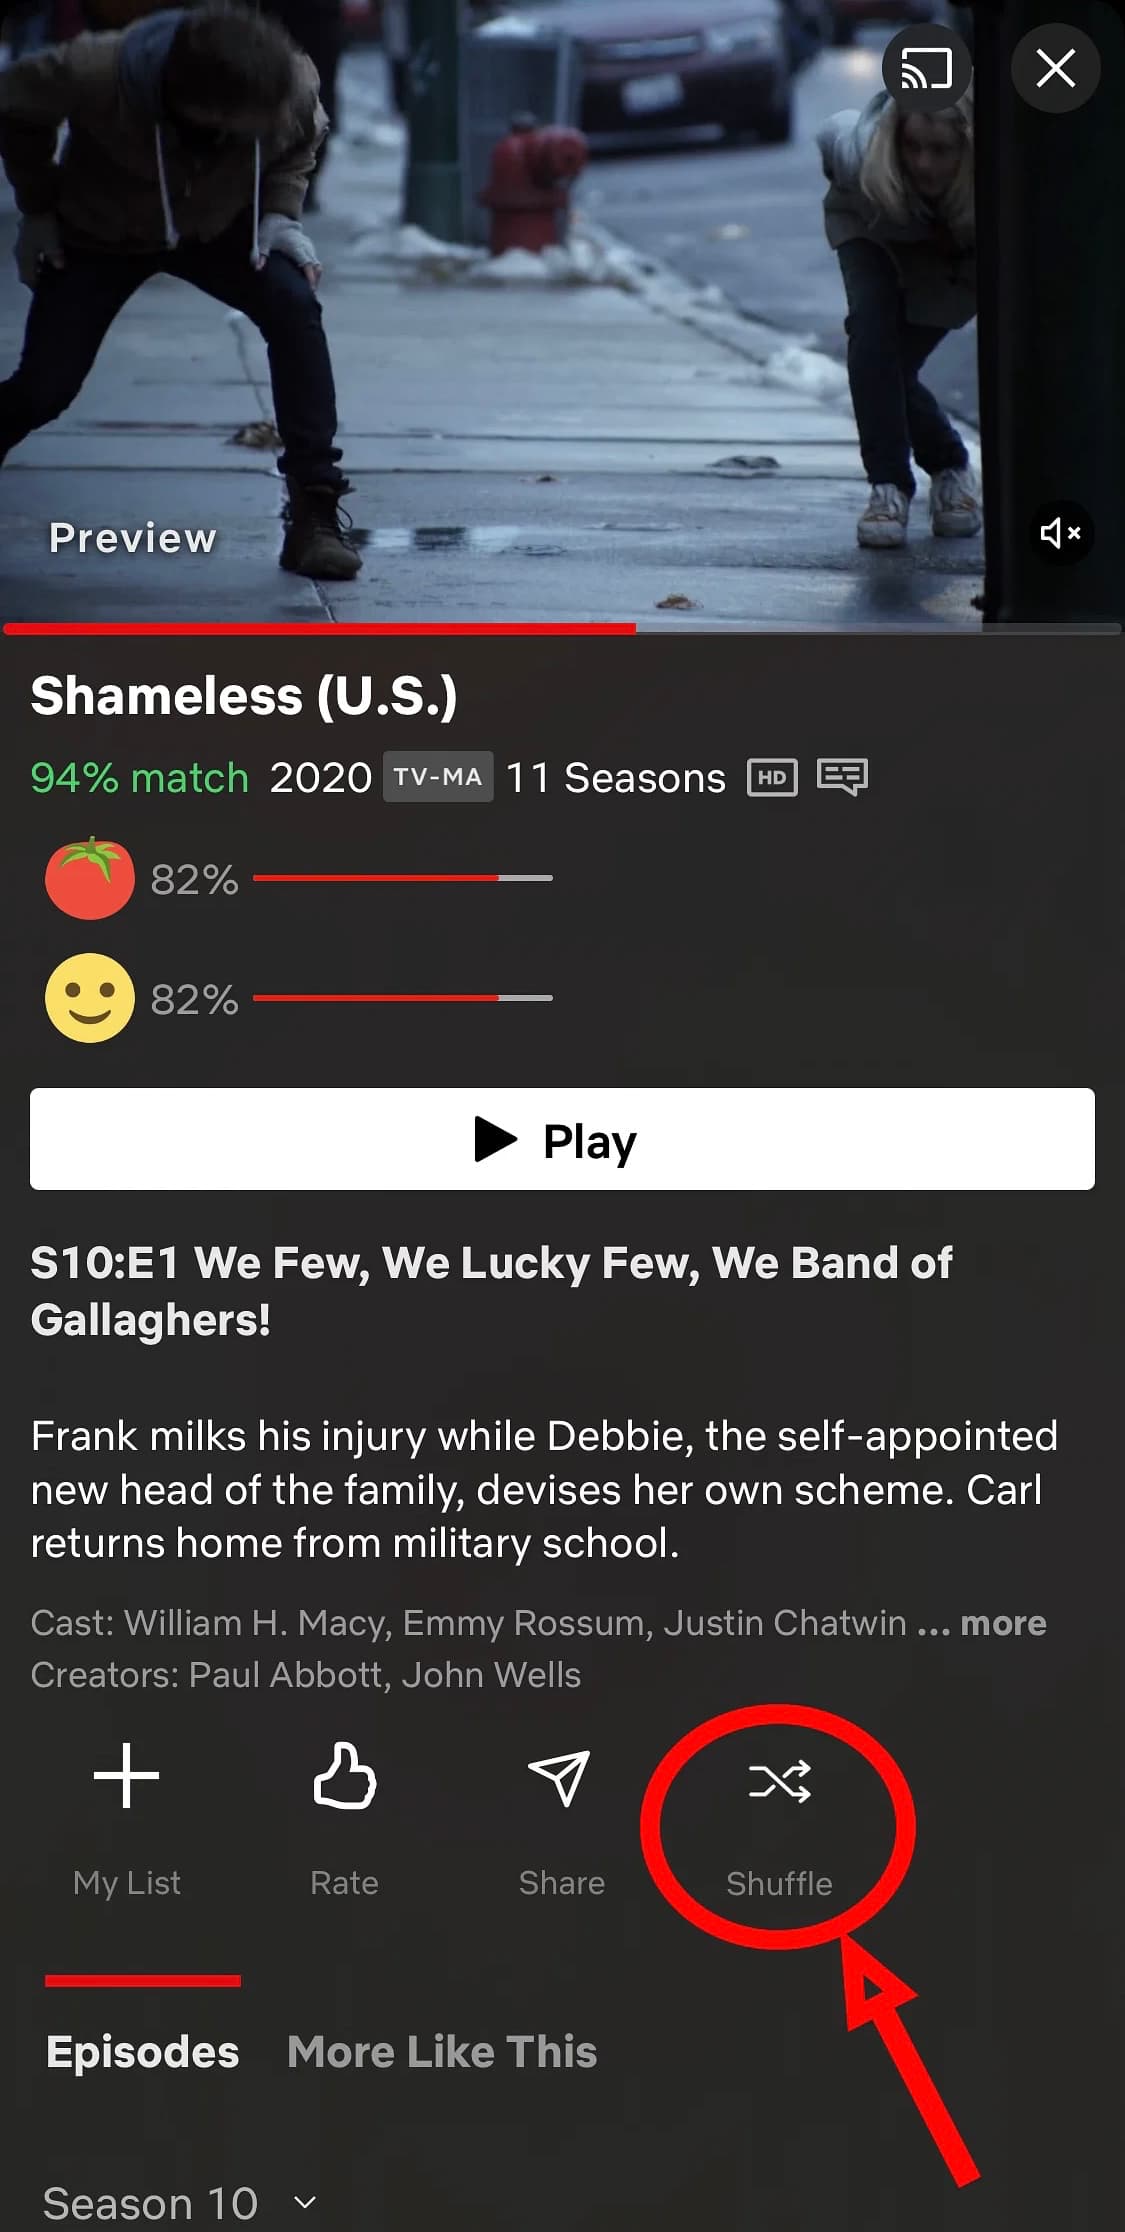 Shuffle button added to Netflix TV shows with FixRoulette for Netflix.